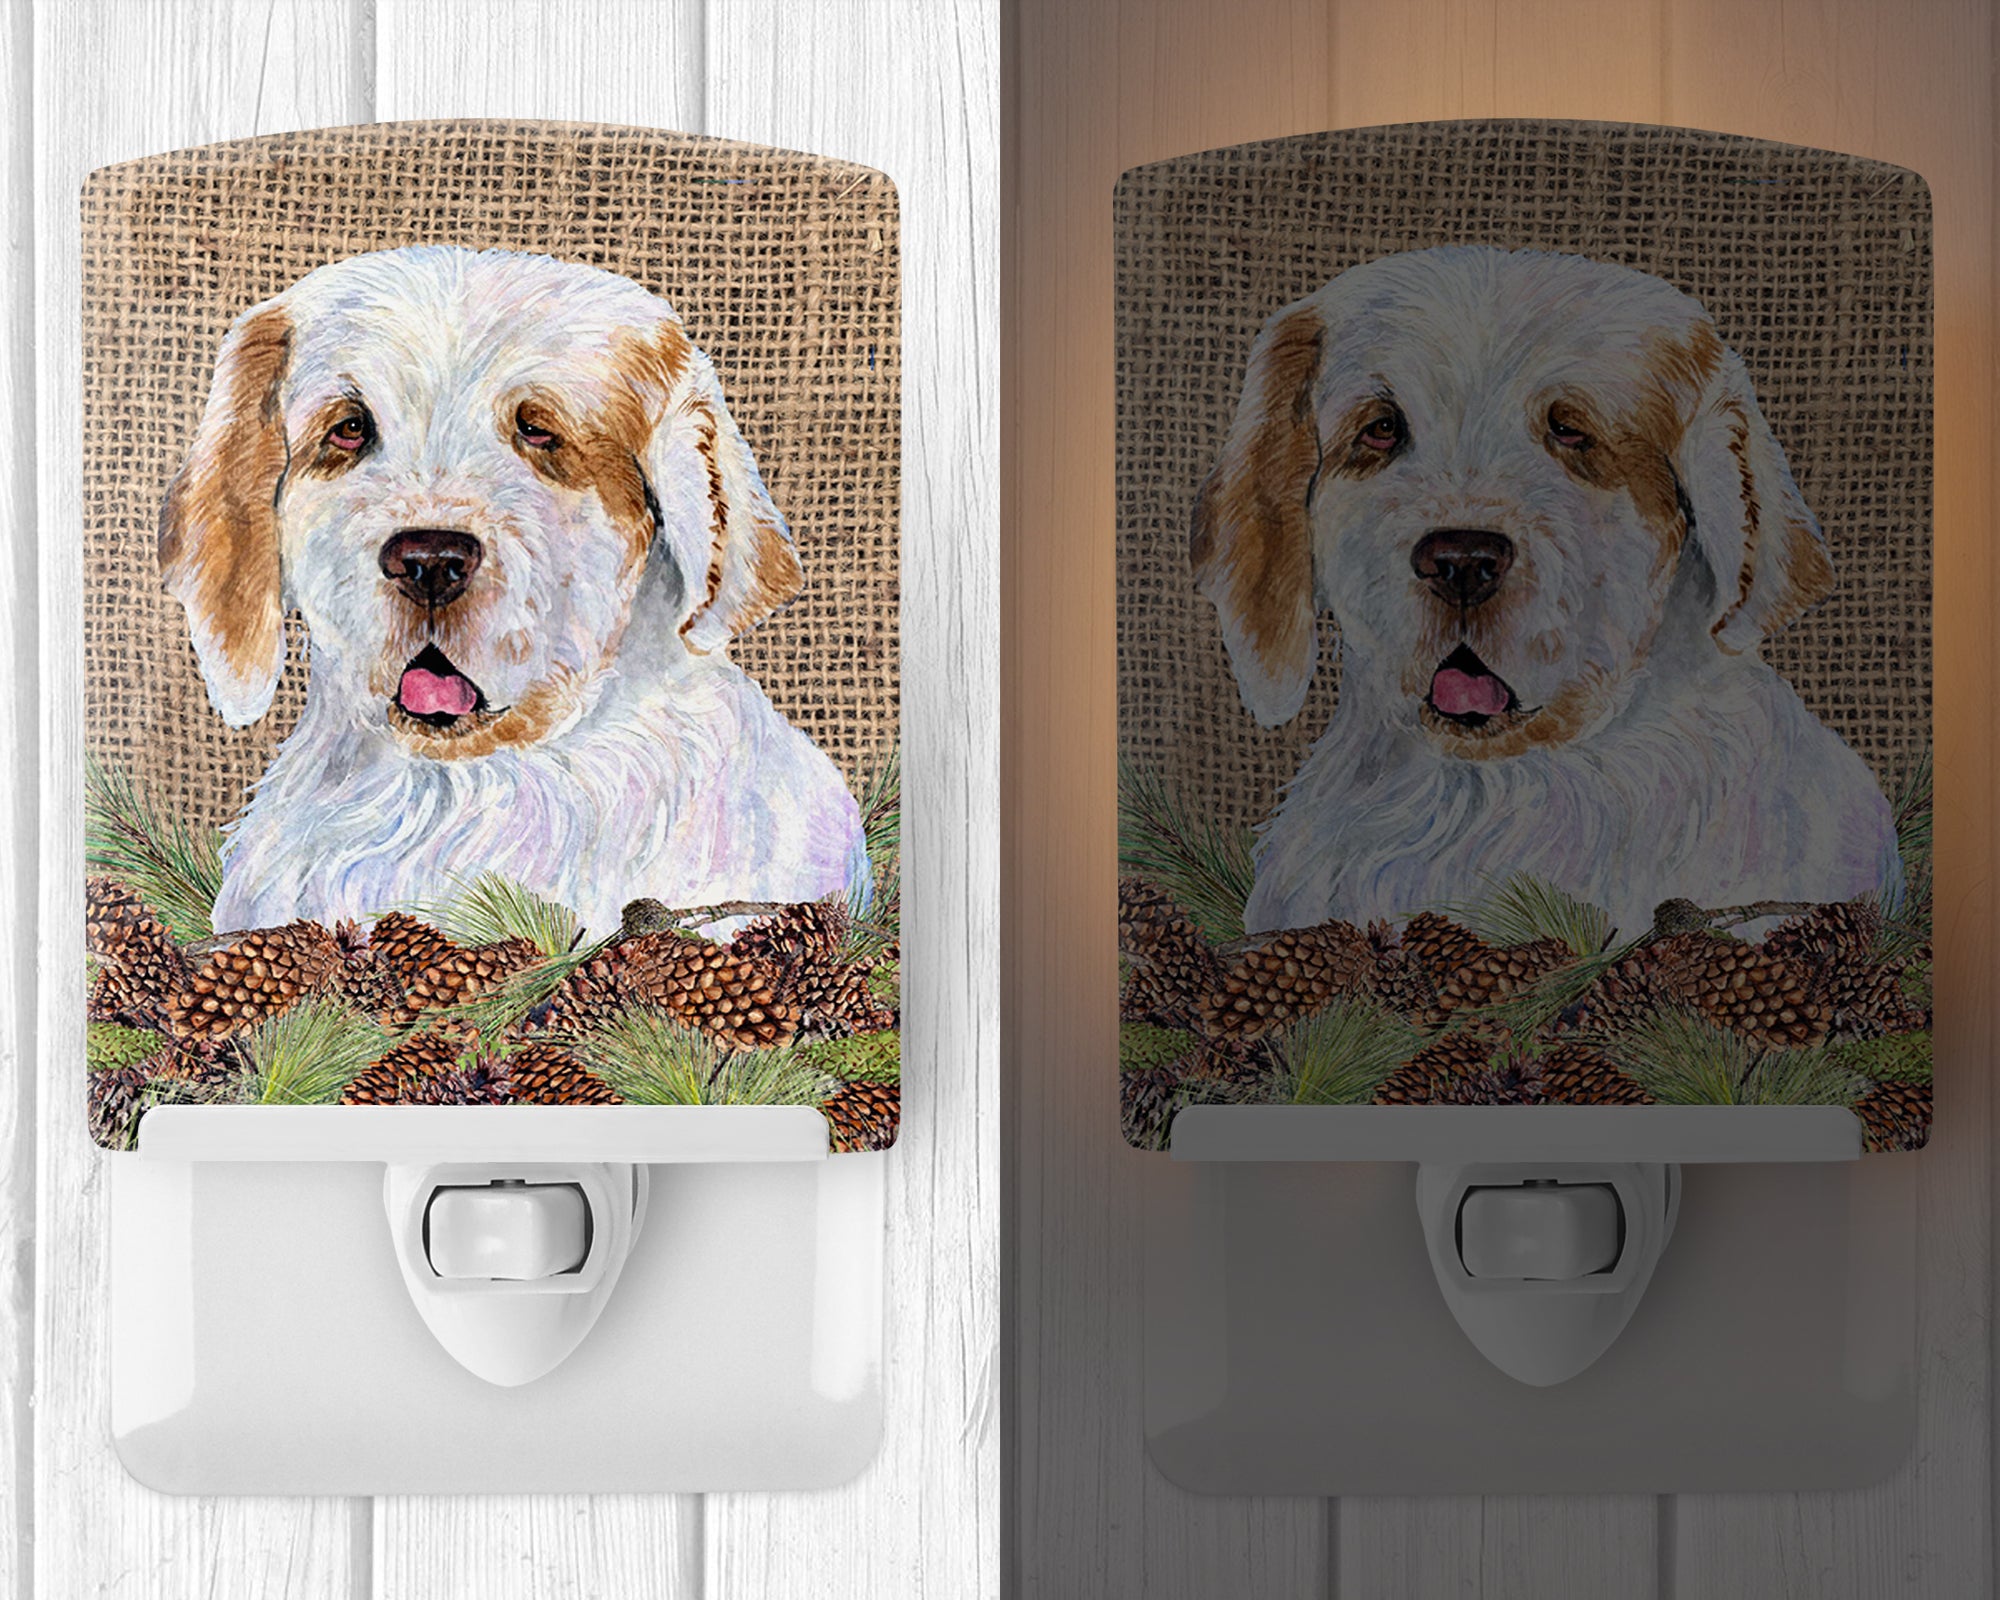 Clumber Spaniel on Faux Burlap with Pine Cones Ceramic Night Light SS4089CNL - the-store.com